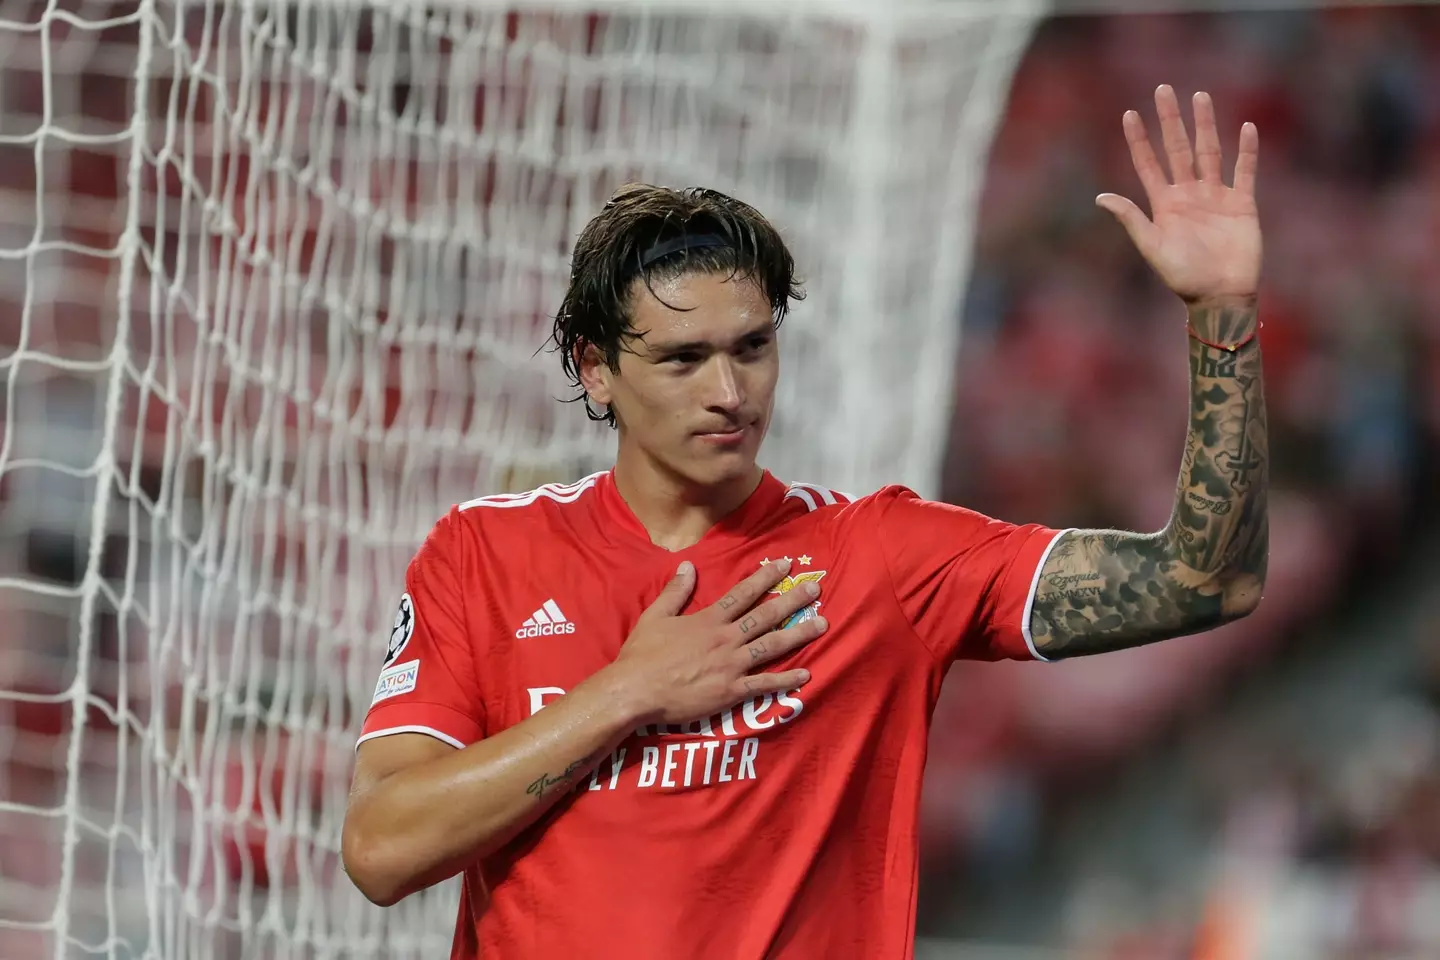 Nunez is expected to join Liverpool from Benfica this summer (Image: PA)